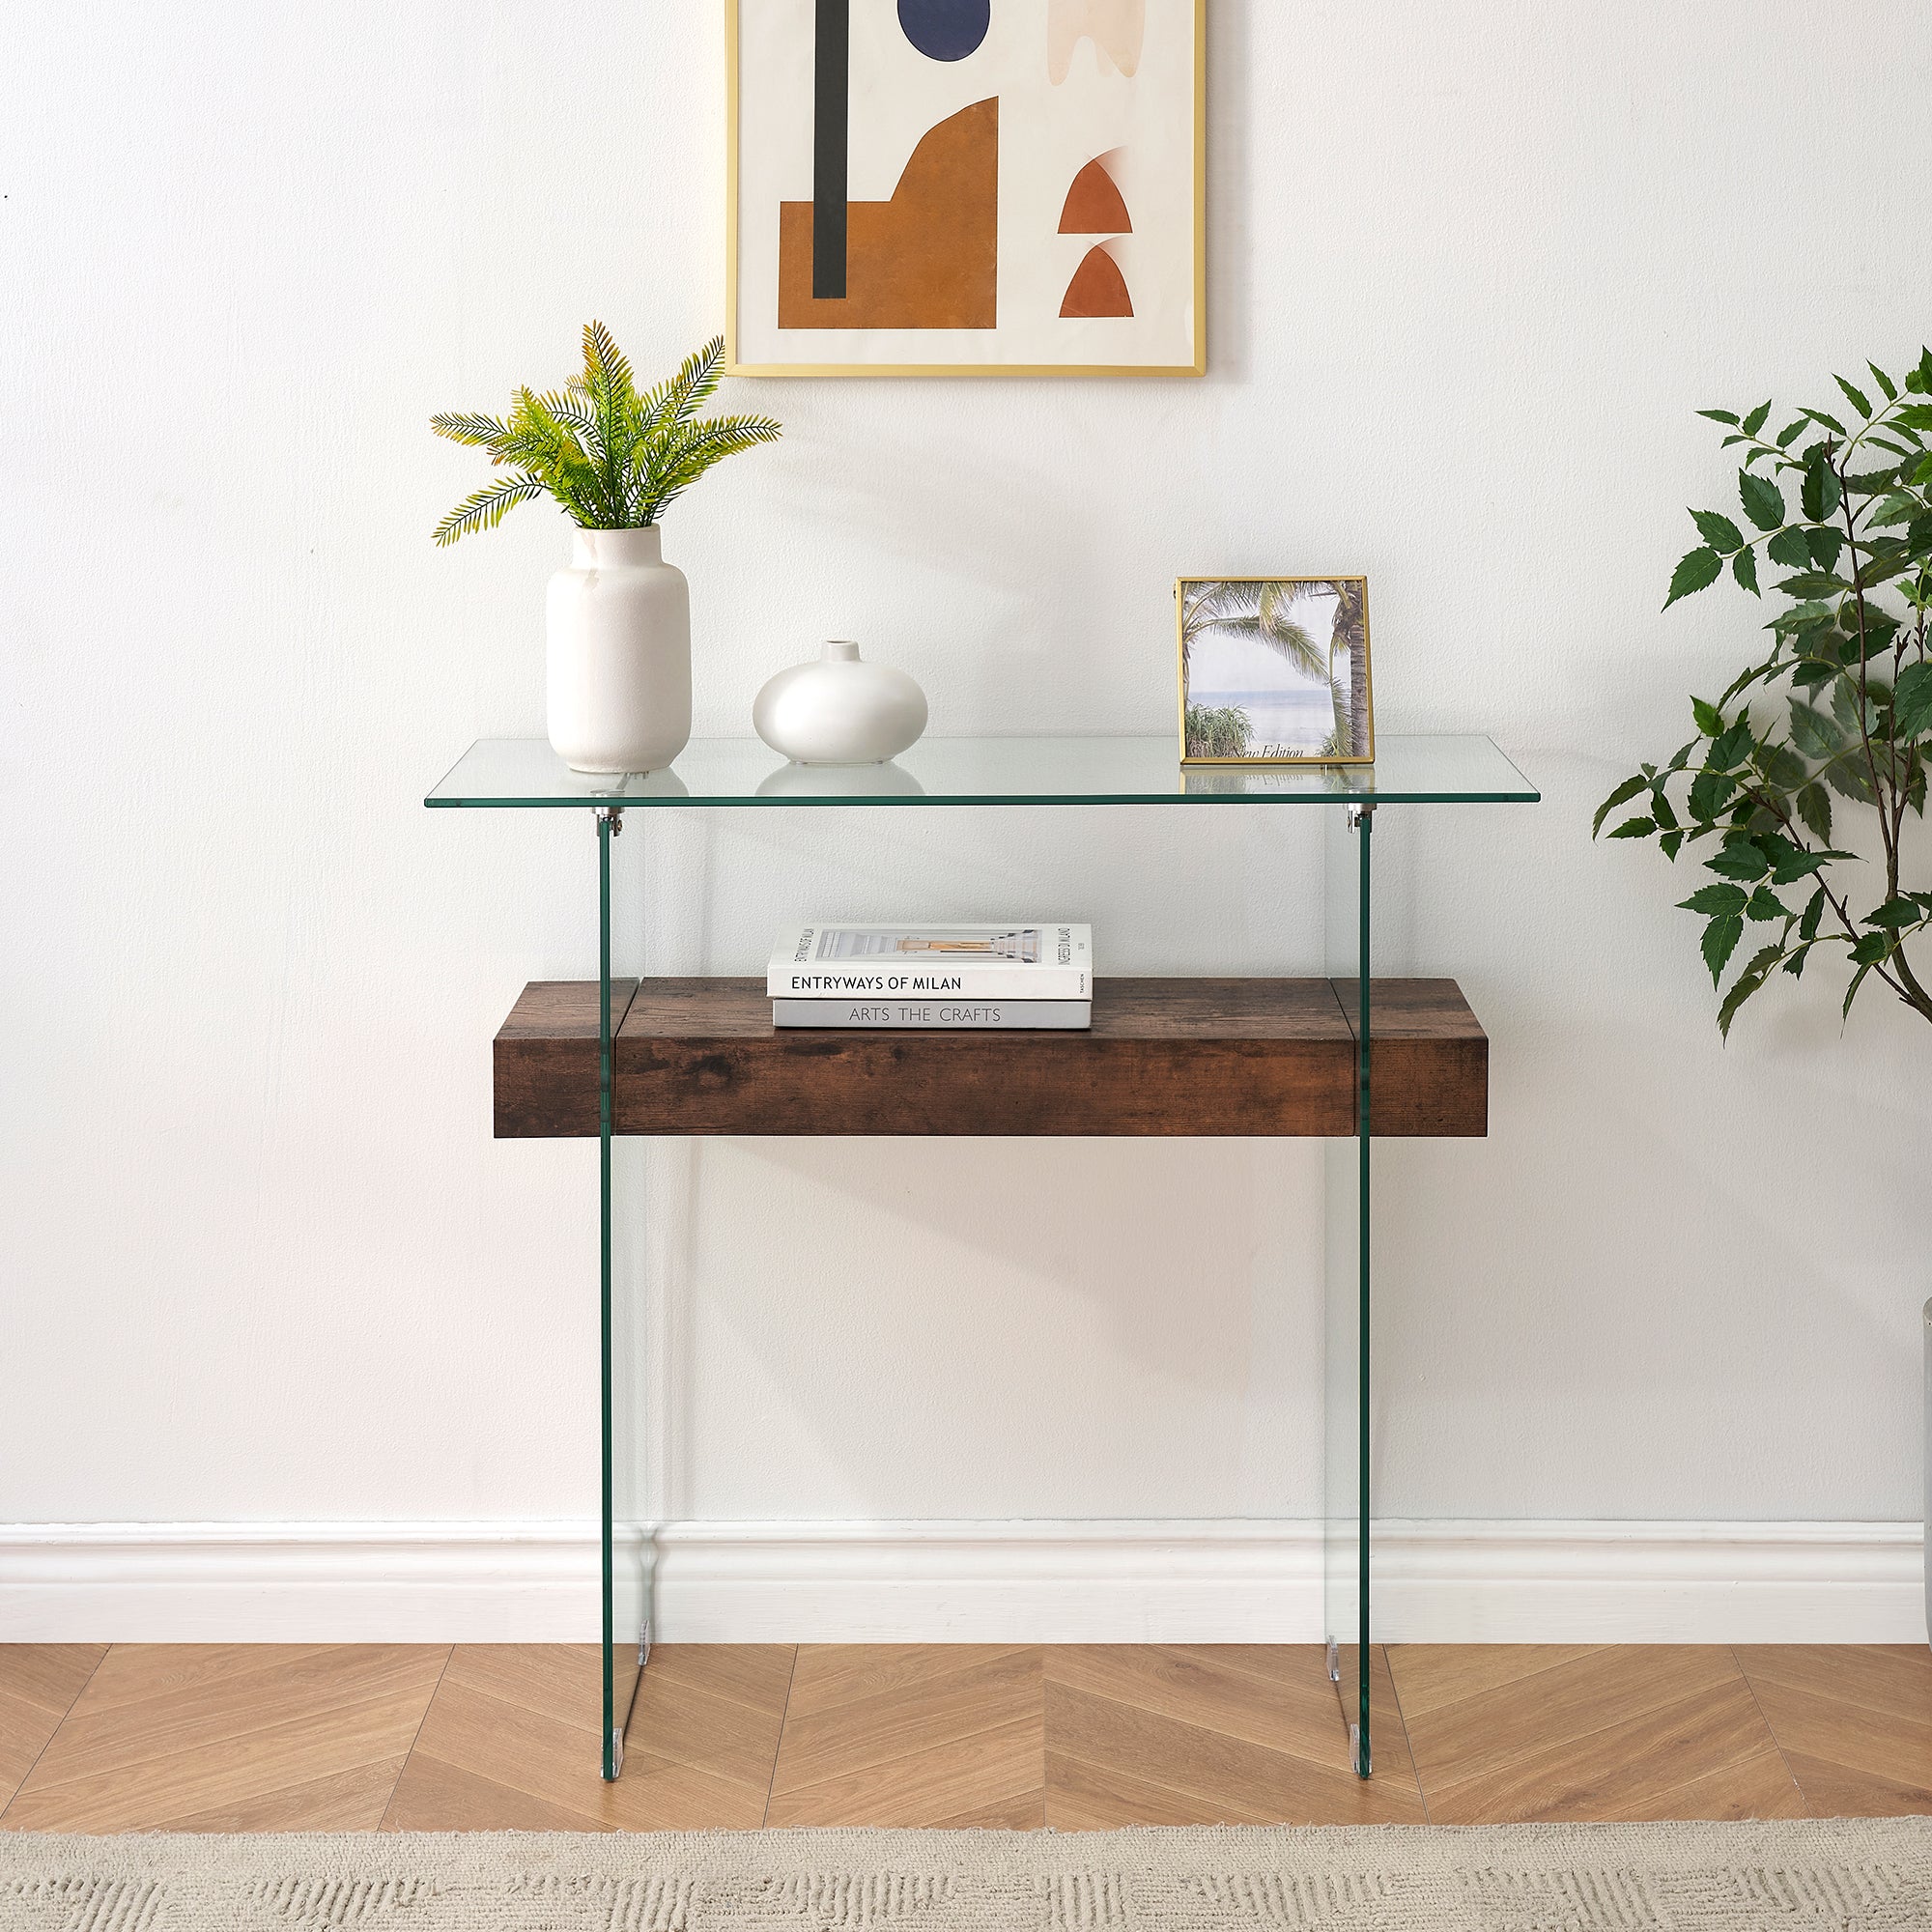 ivinta Narrow Glass Console Table with Storage, 31.5'' Modern Sofa Table for Small Space, Small Entryway Table with Natural Wood Shelves for Living Room, Hallway